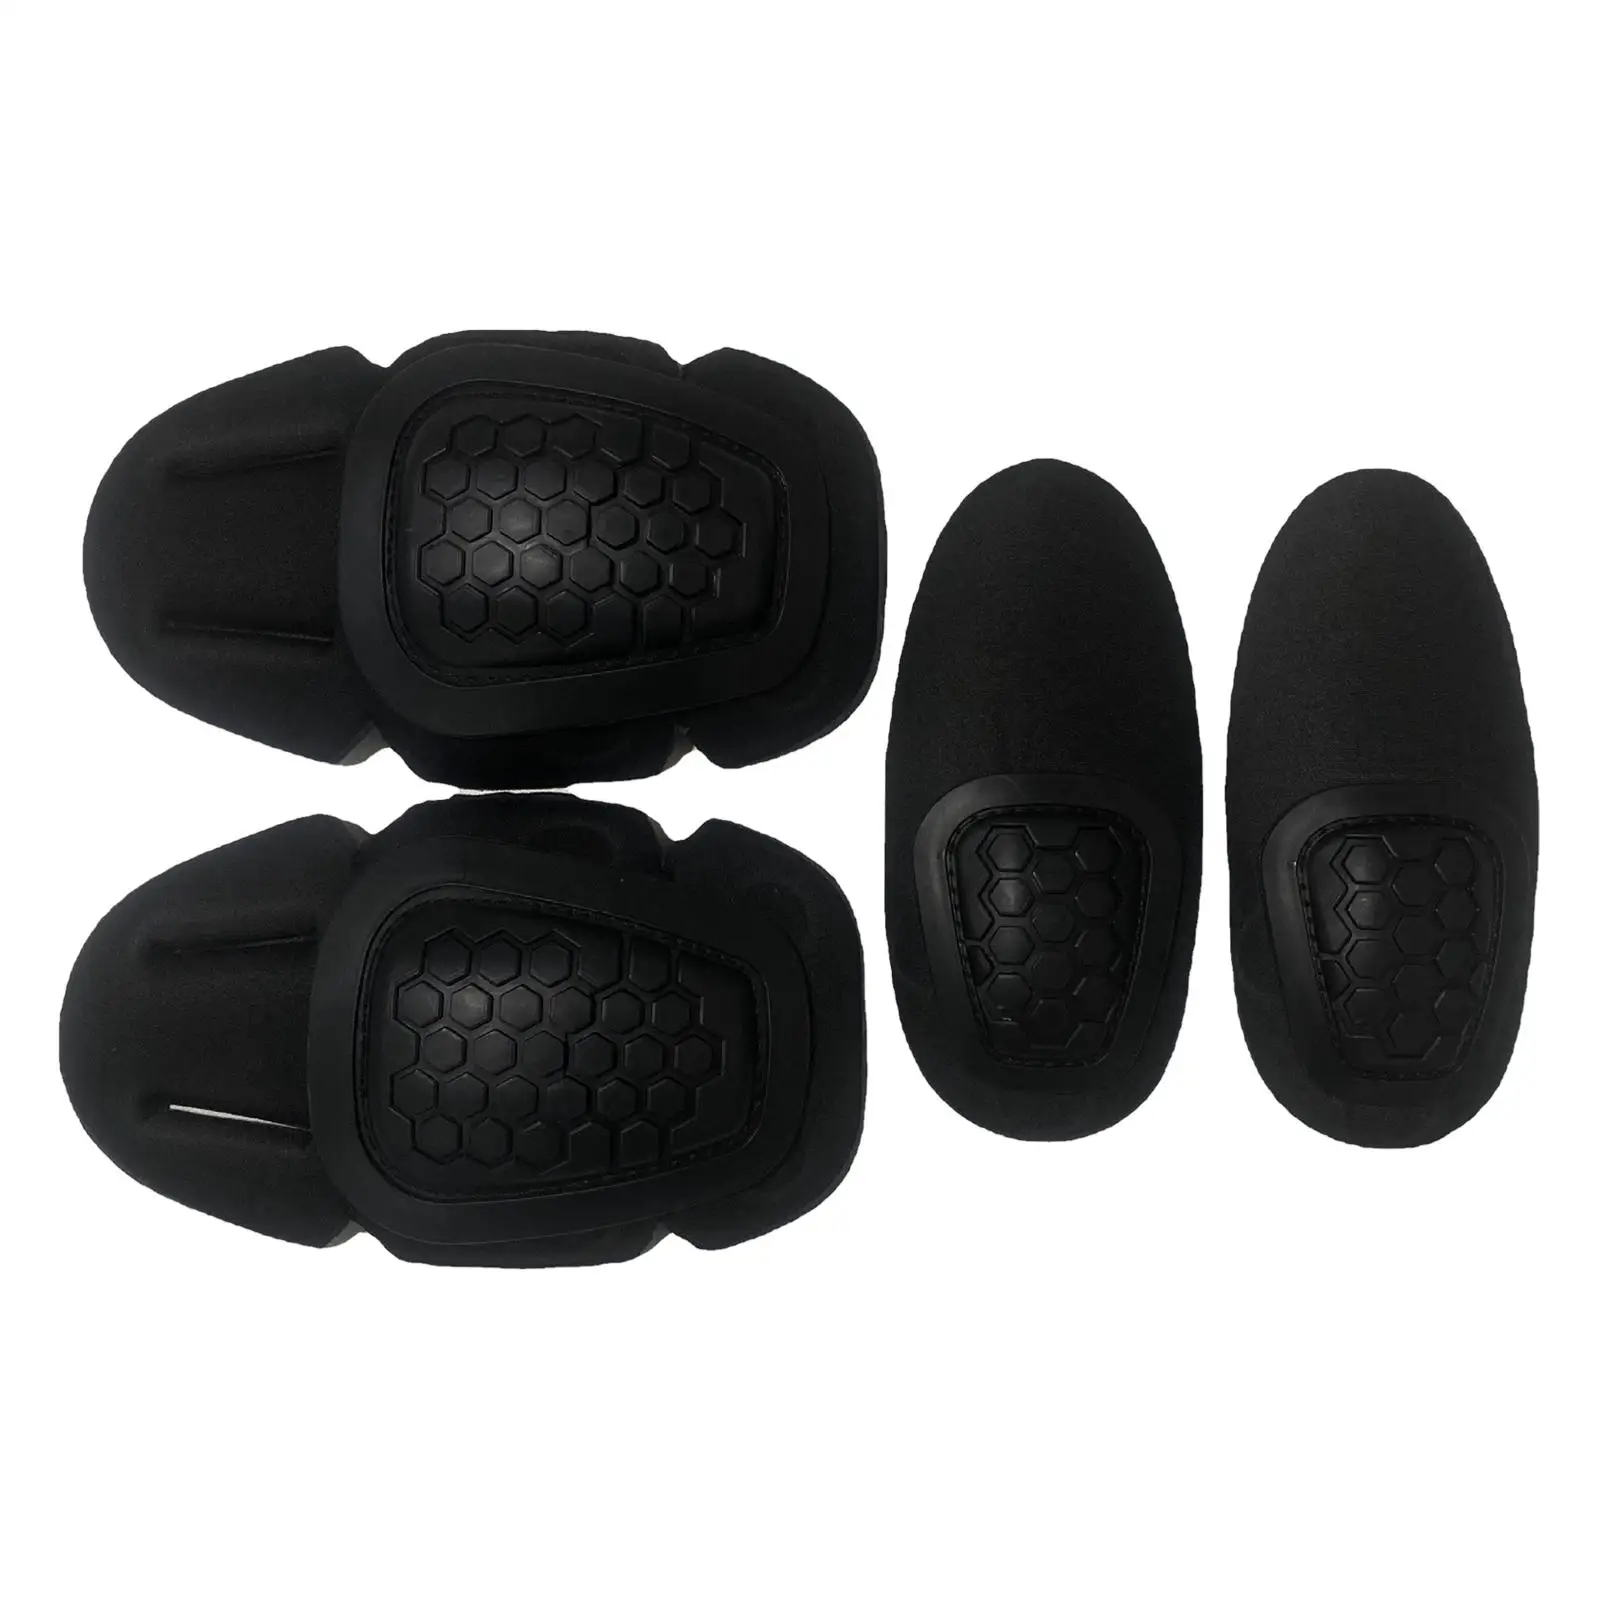 

4Pcs Knee Elbow Support Pads Comfortable Shock Absorbing Shin Guards for Skating Riding Sports Rollerblading Unisex Men Women